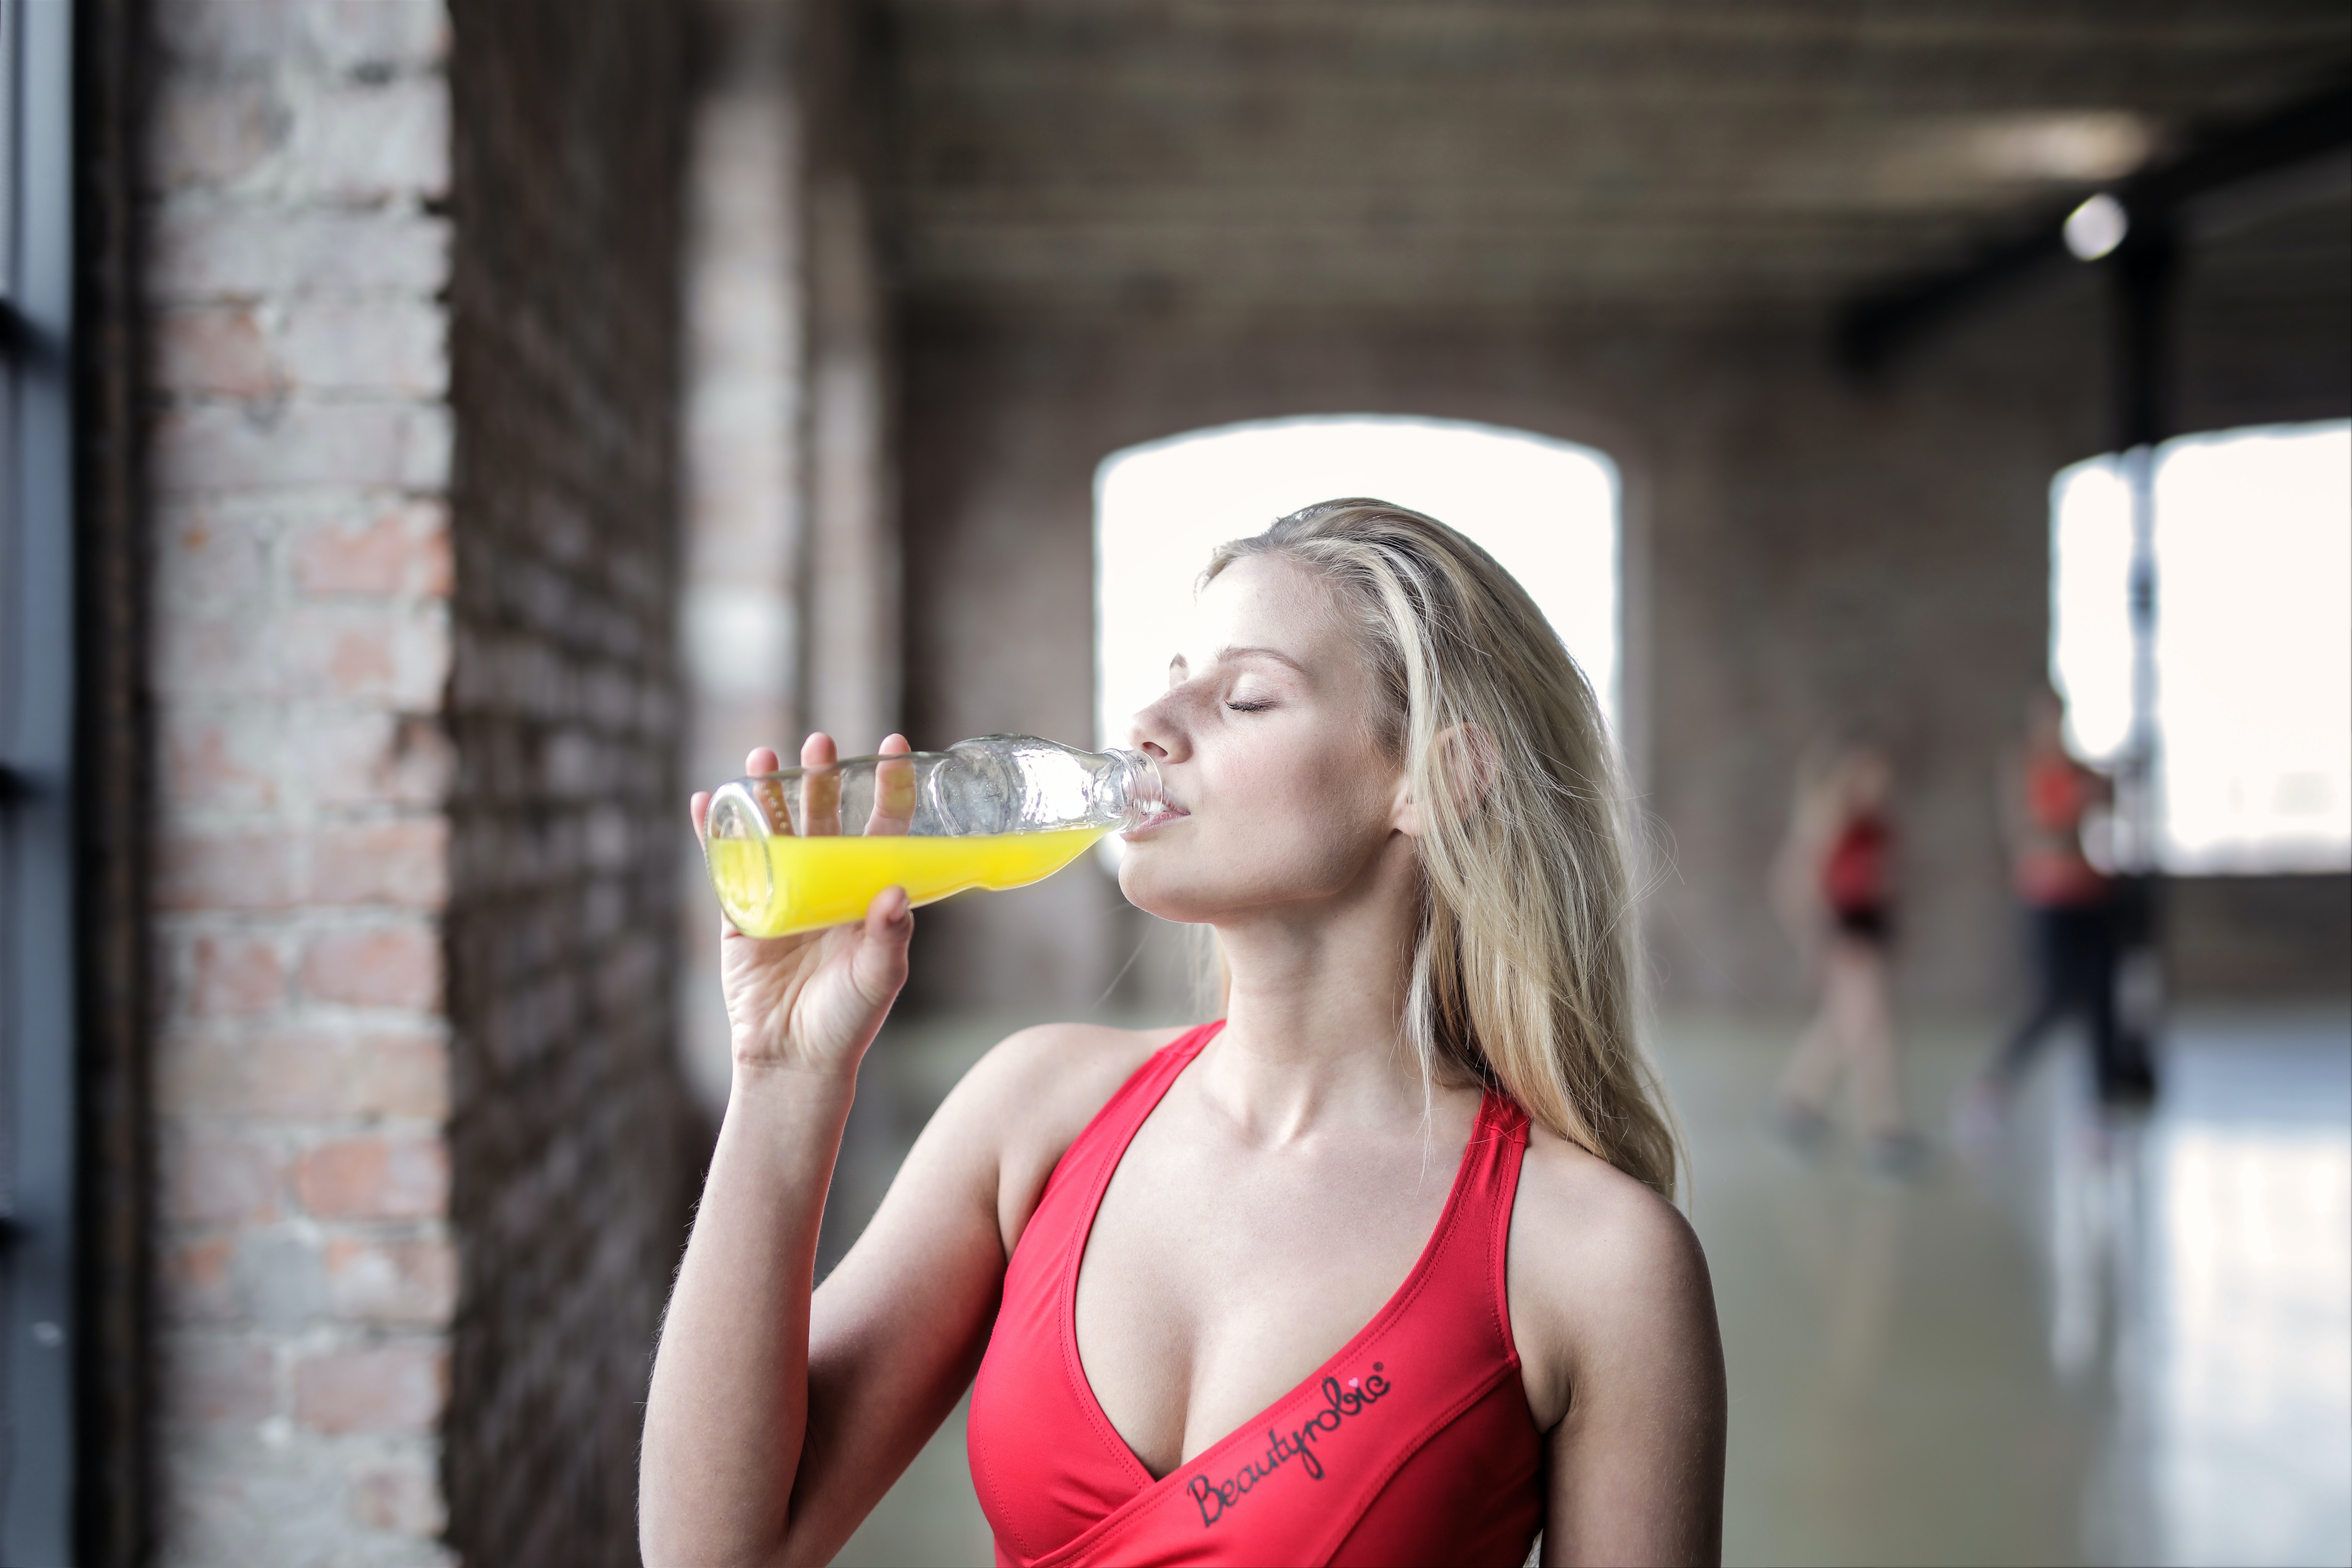 A man wearing a sports bra drinking a yellow beverage